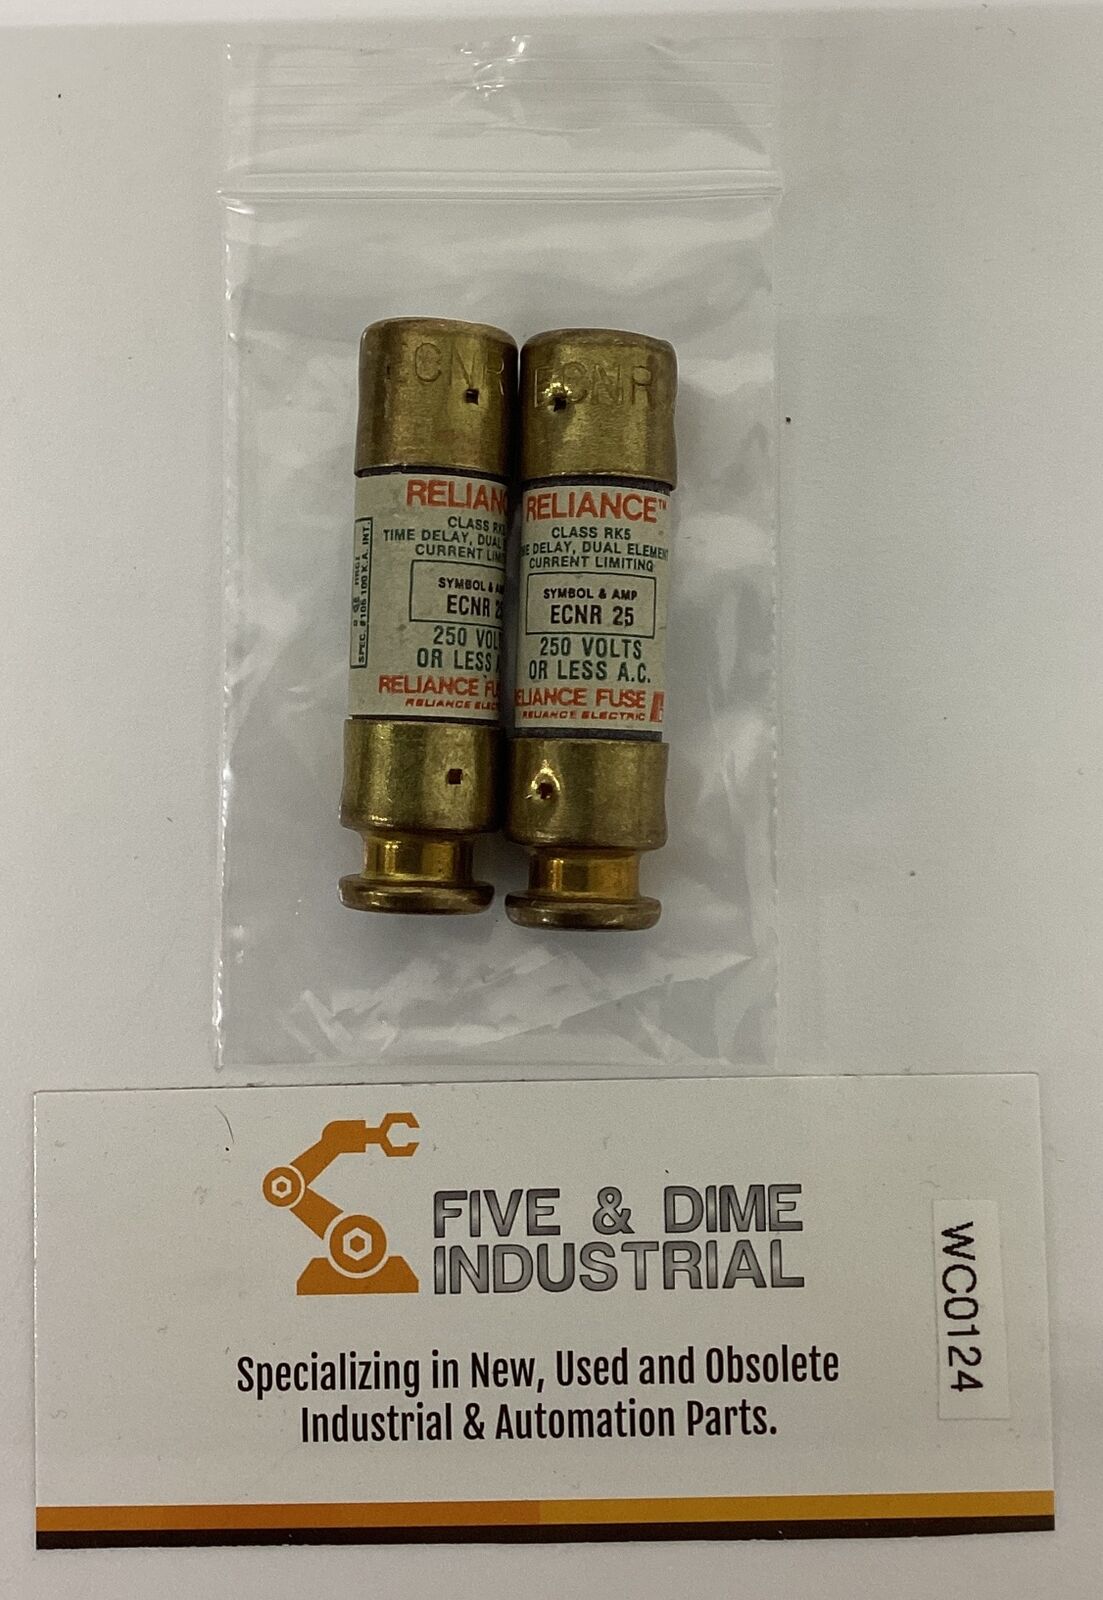 Reliance ECNR-25 Lot of 2 Time Delay Fuses RK5 (CL127)